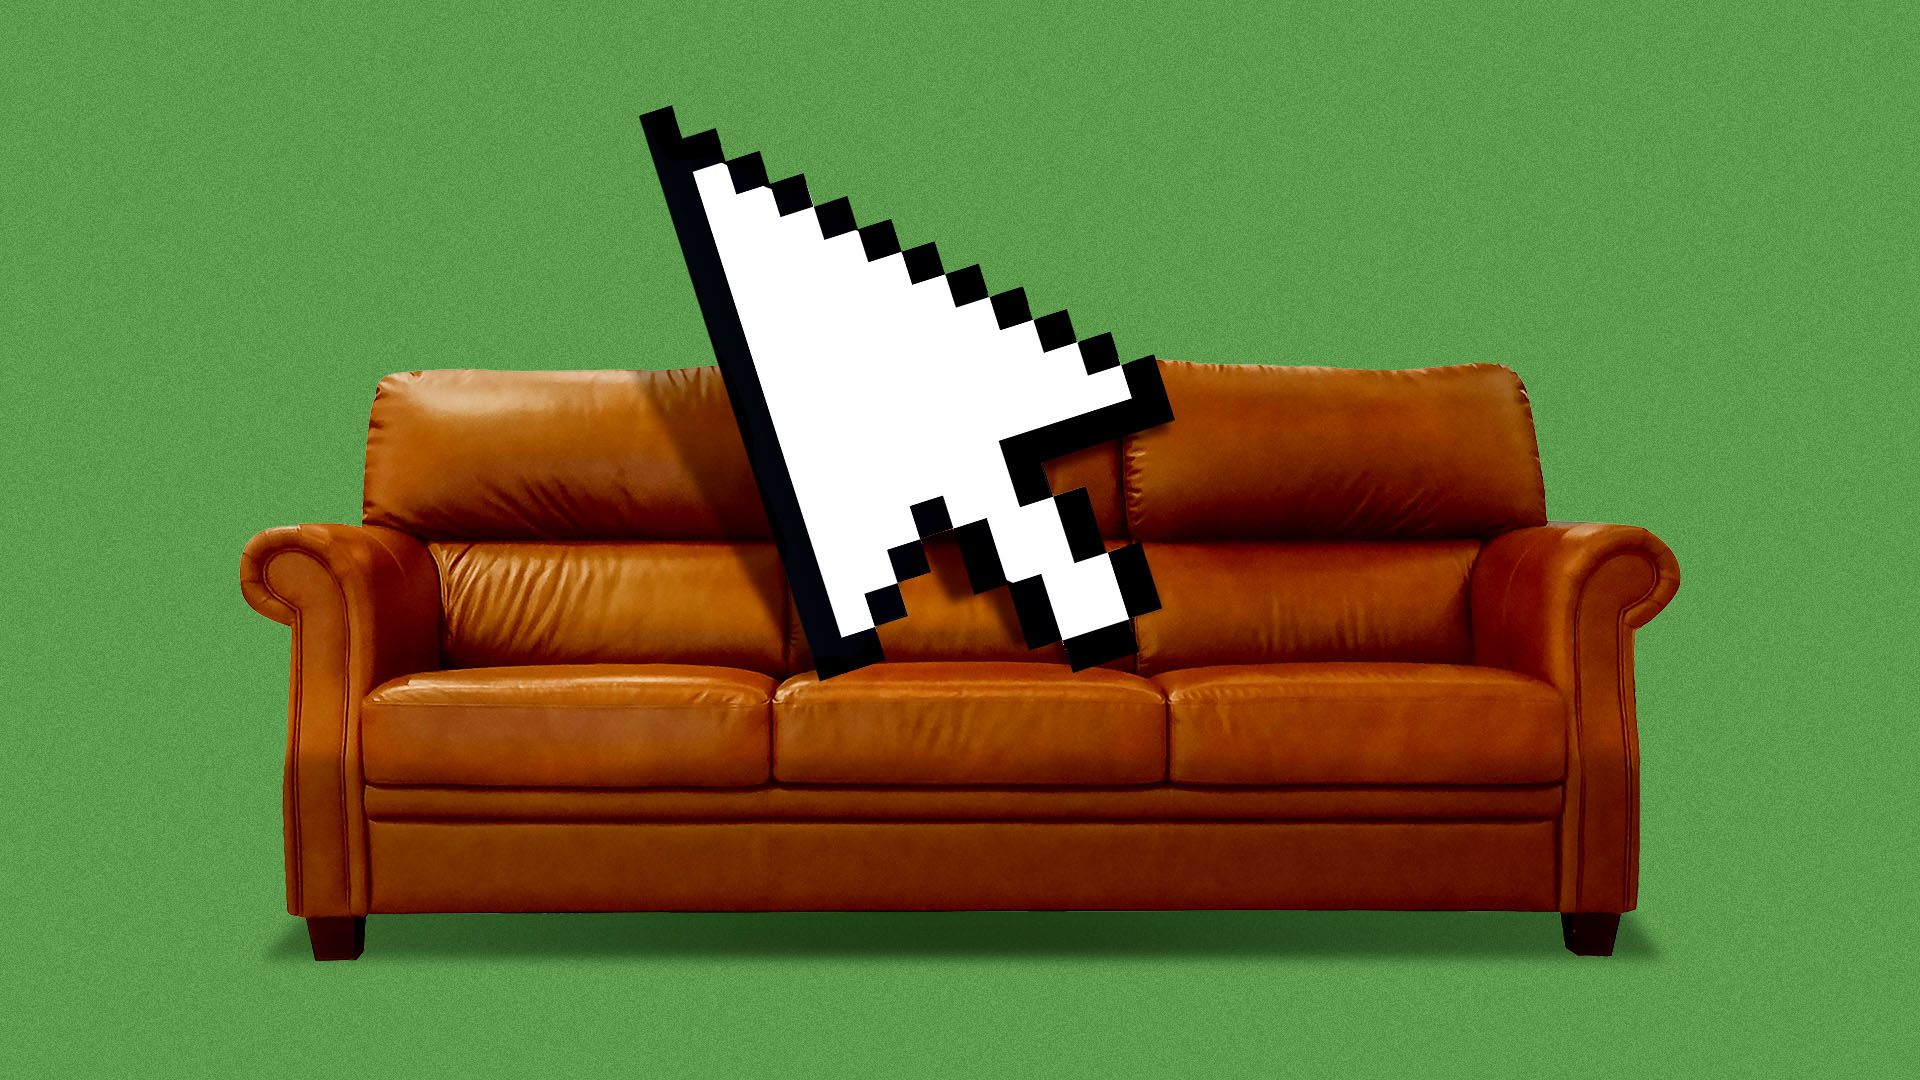 Illustration of a cursor lounging on a couch